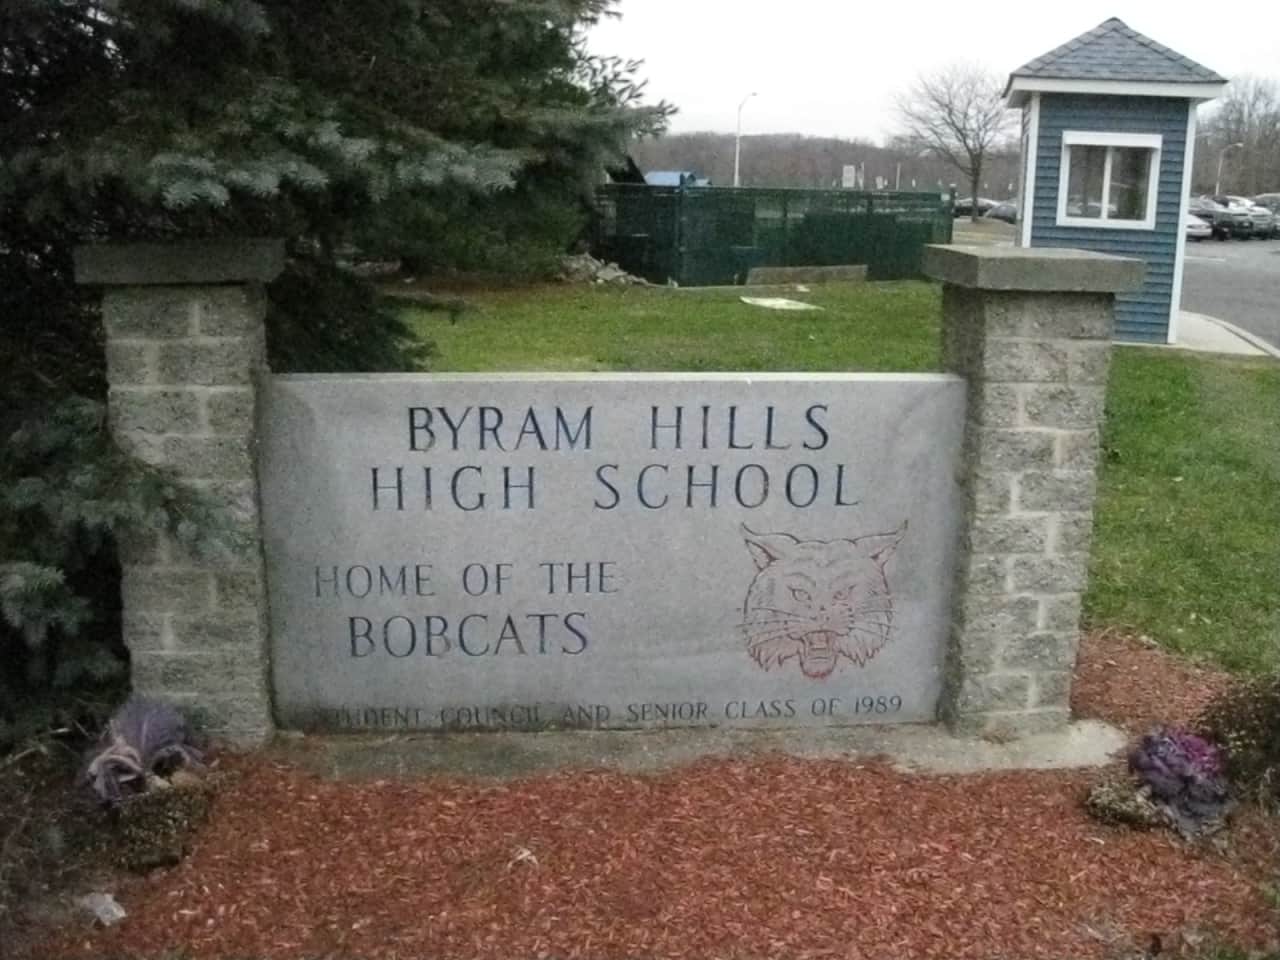 Byram Hills was ranked among the best high schools in New York State.